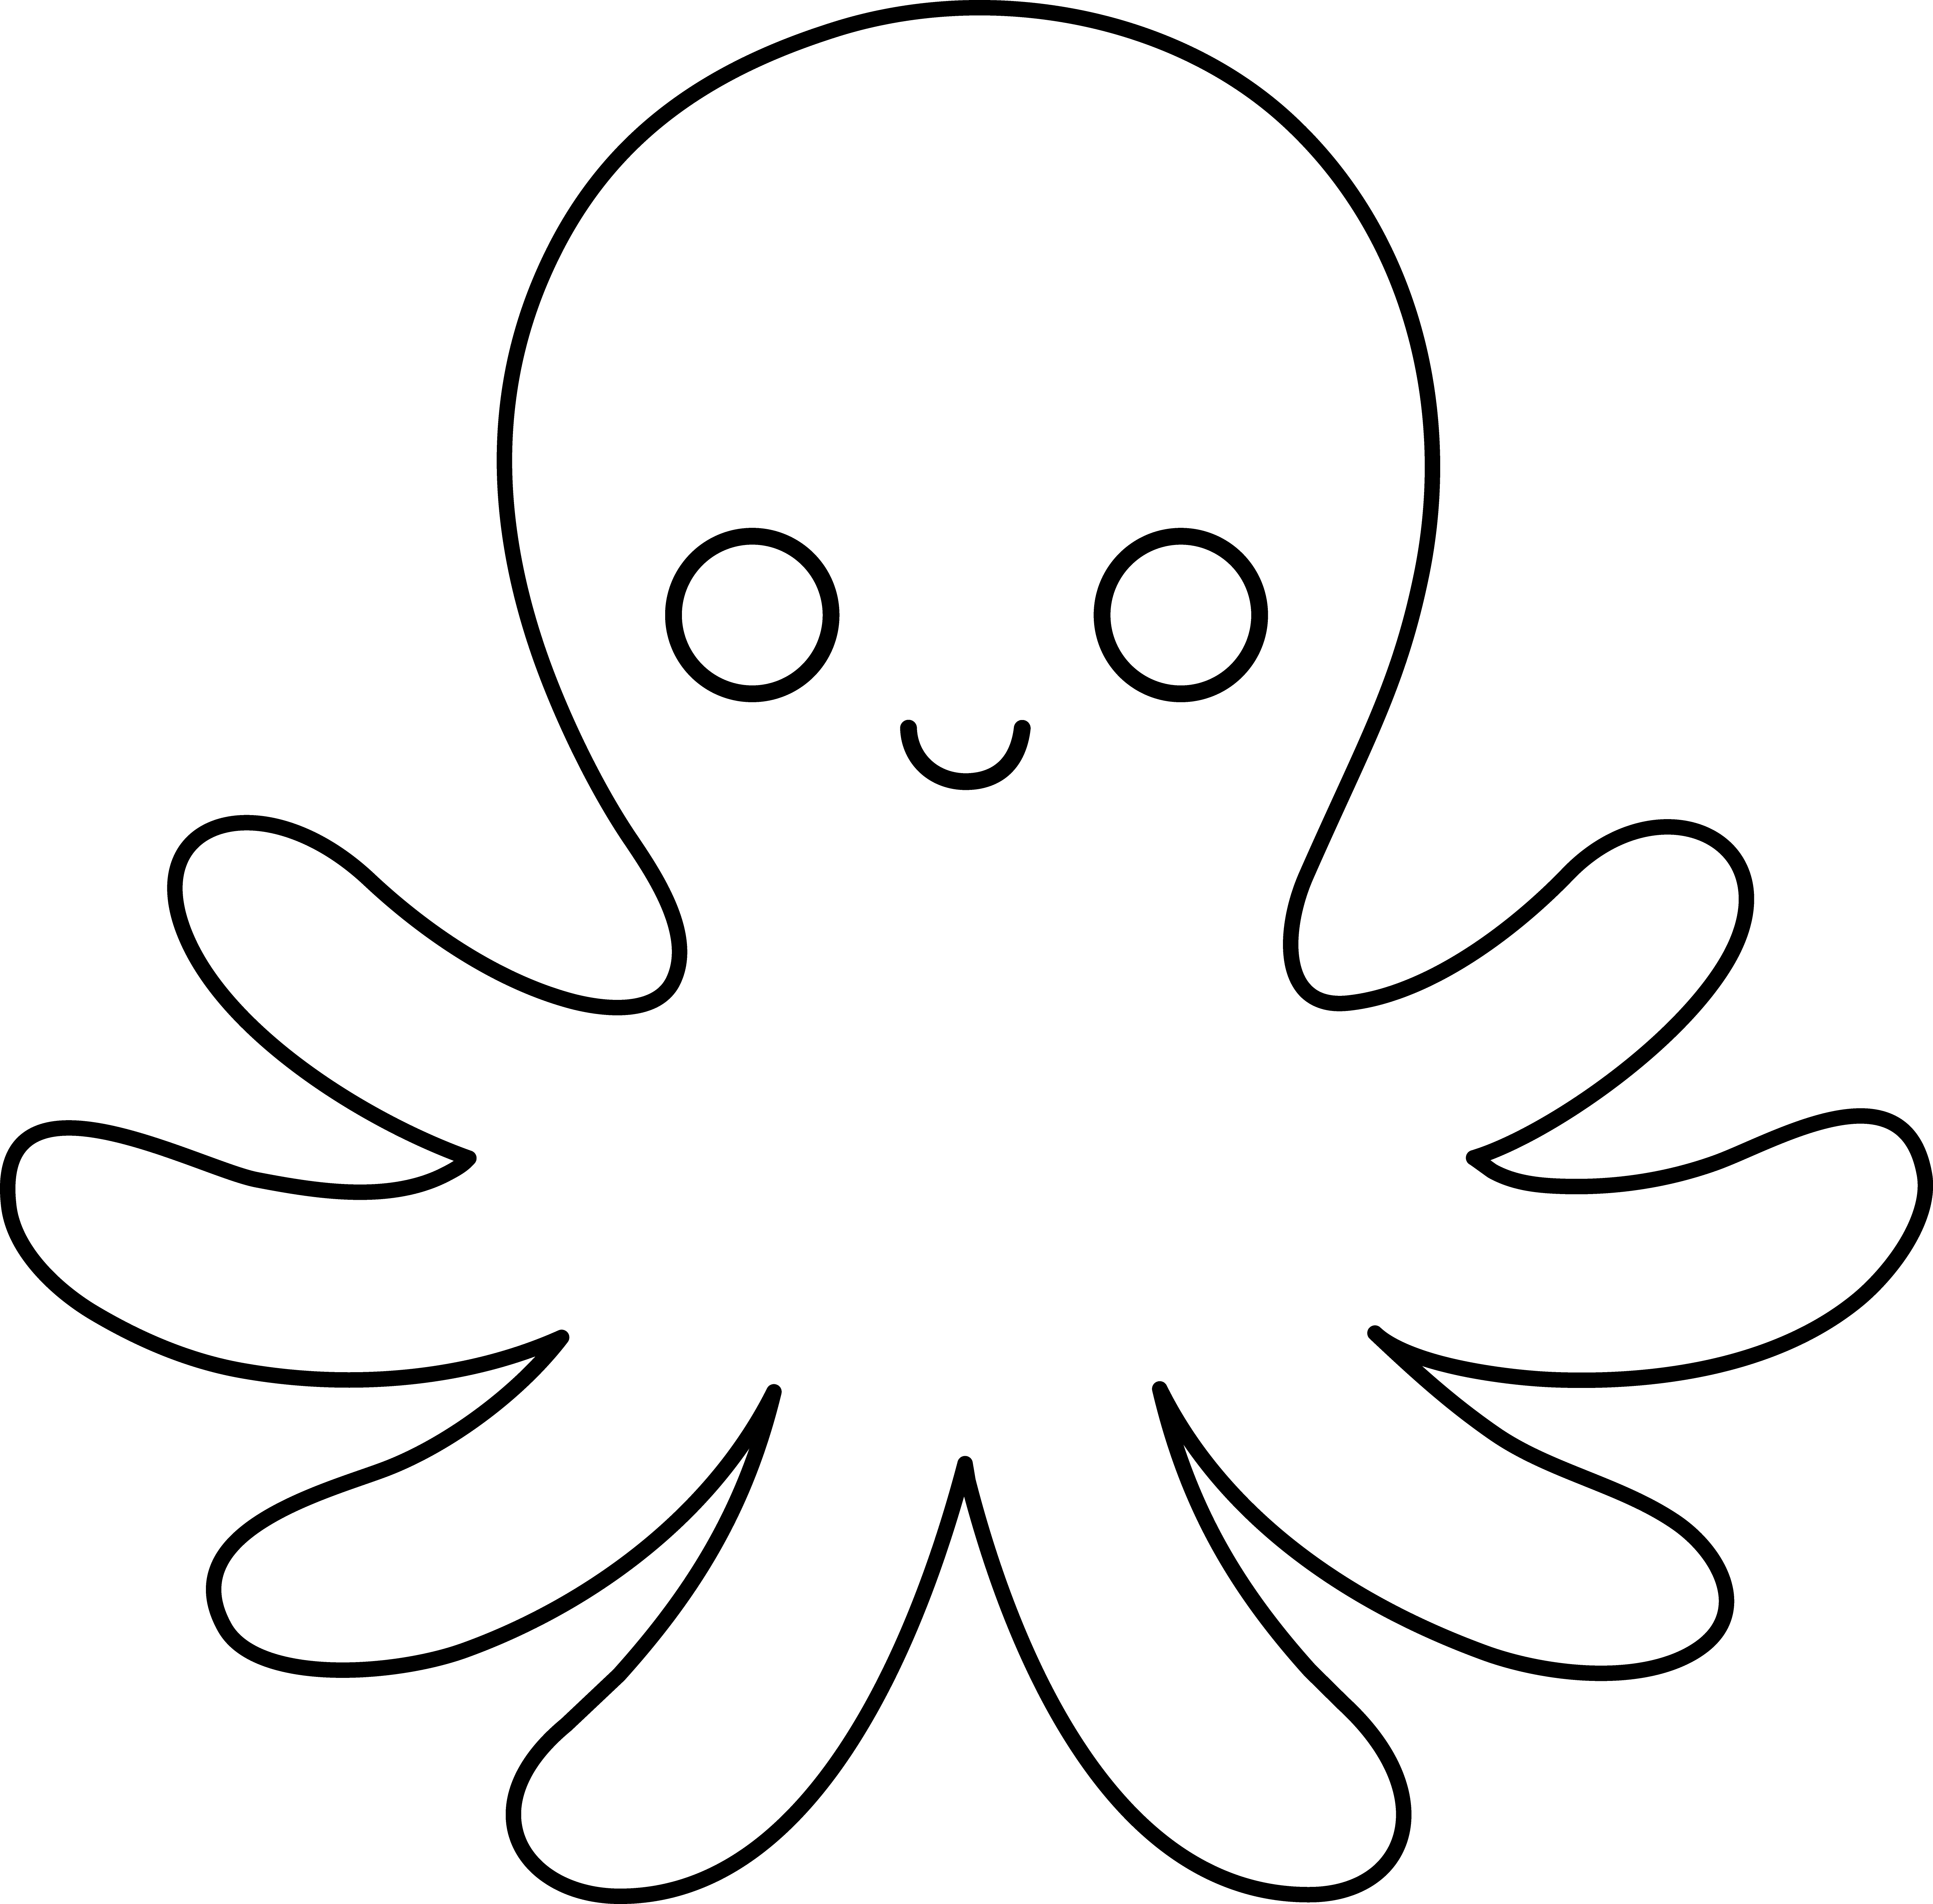 octopus-outline-cliparts-co